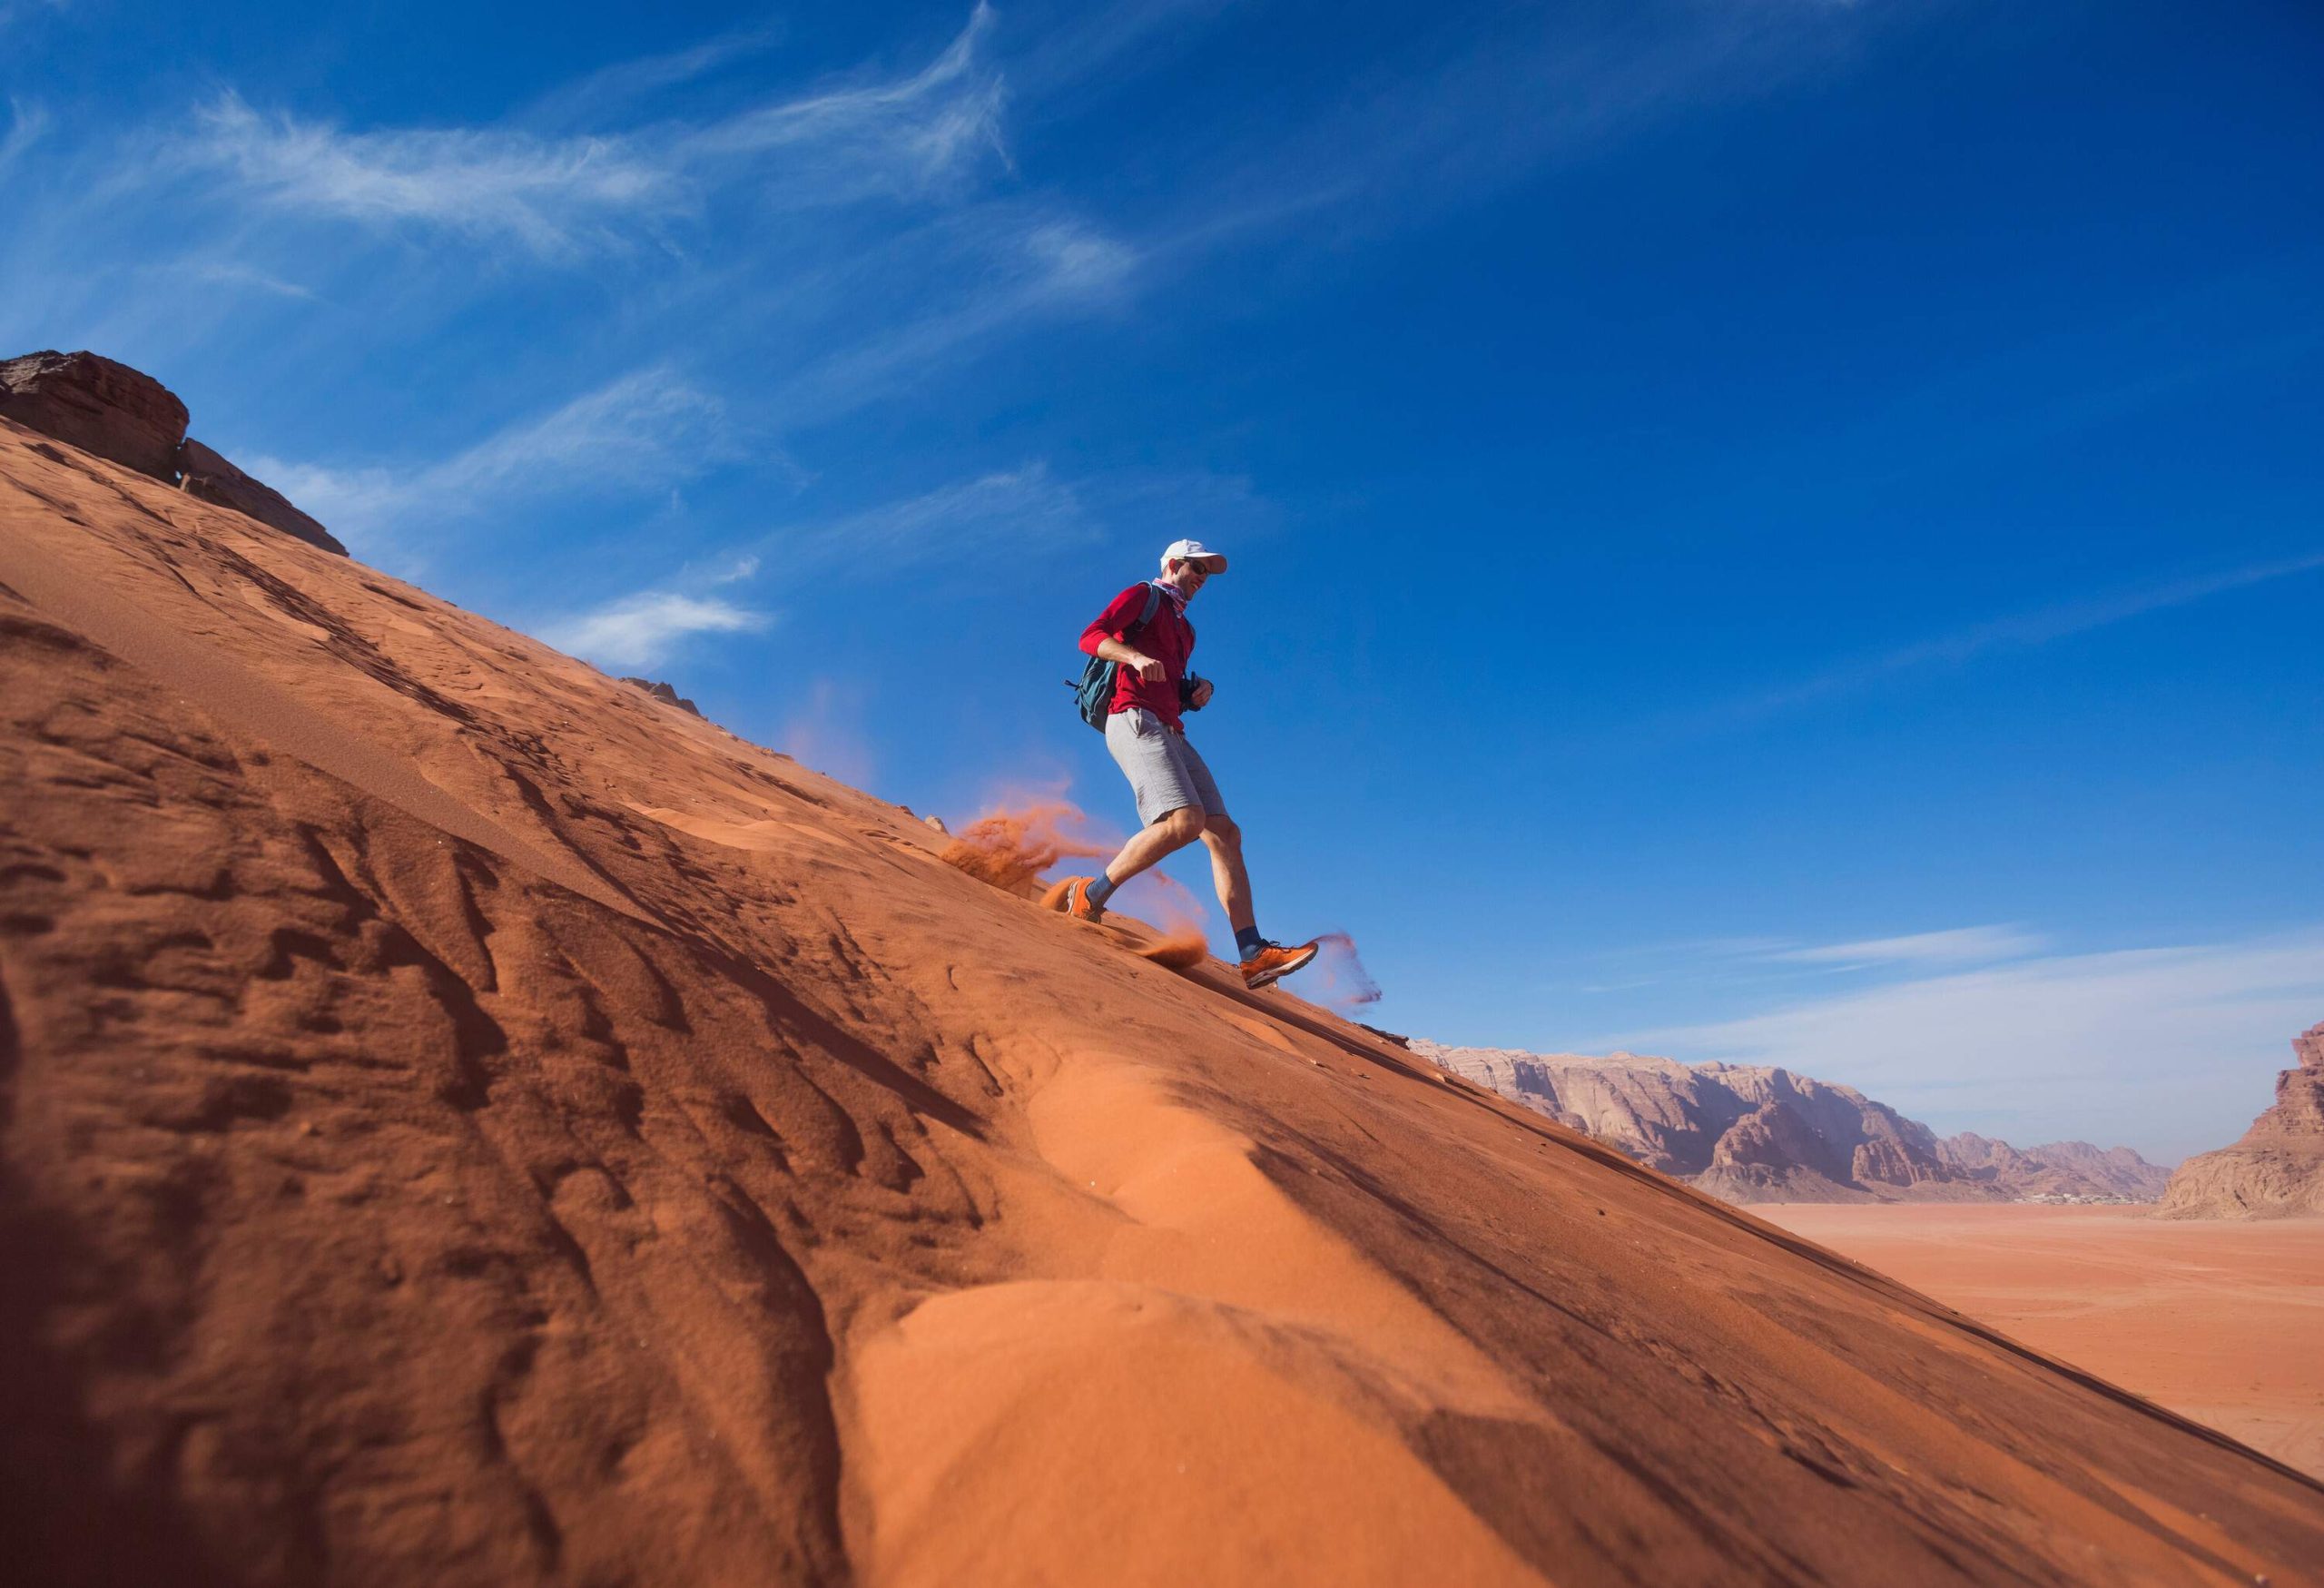 A man sprints down the sandy dune in the desert.